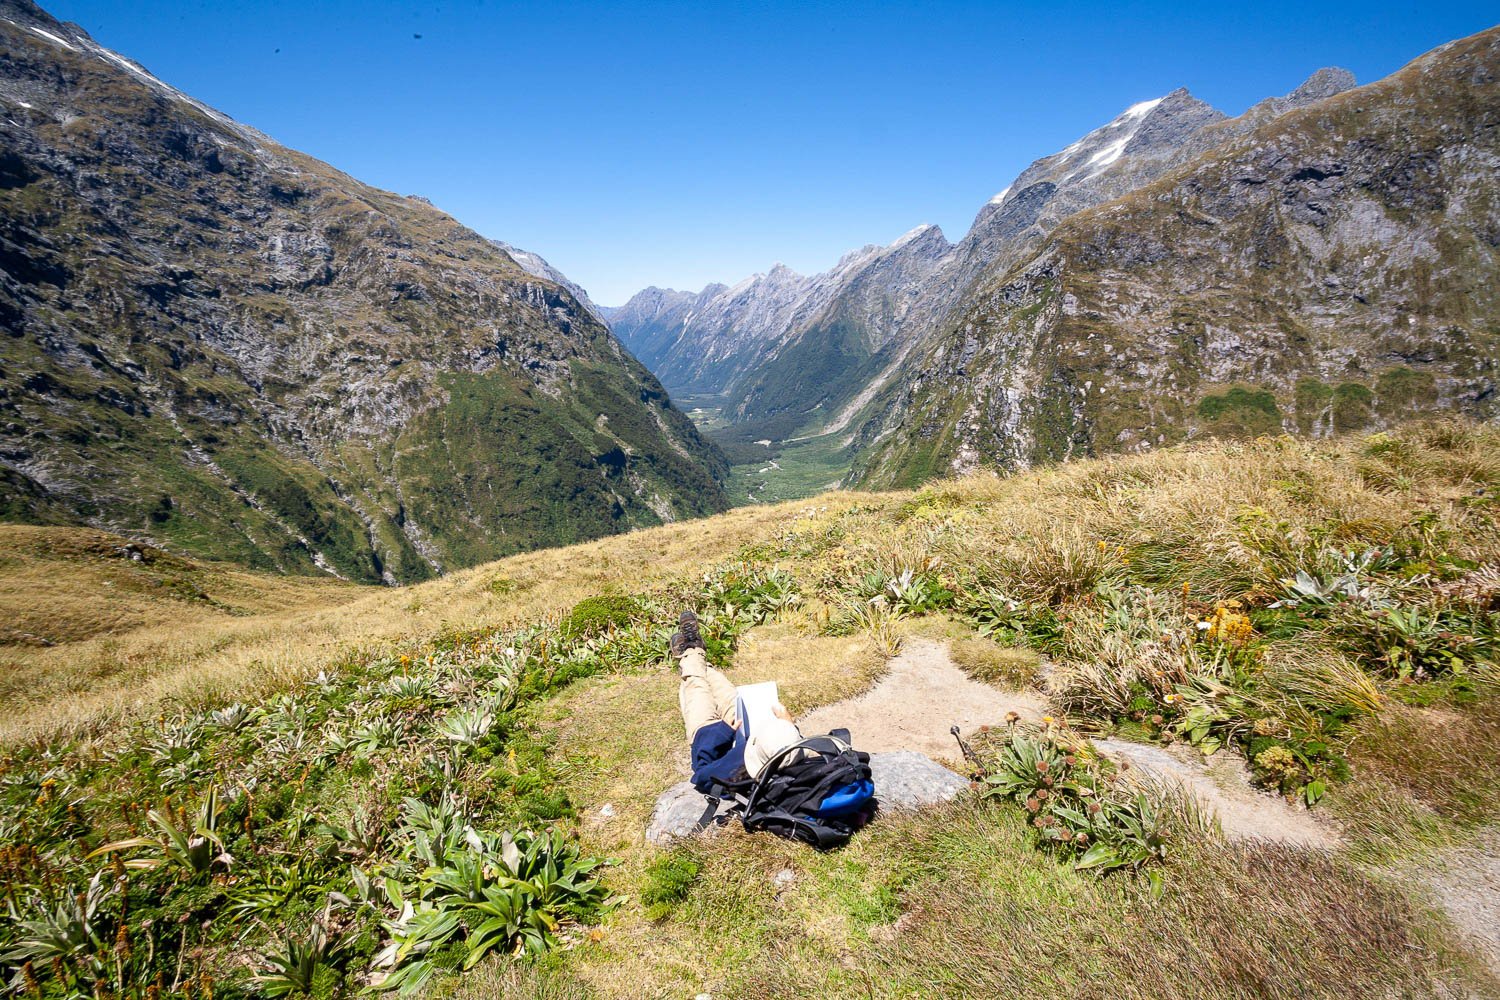 A green mound with some massive green rocks behind, Relaxing at the Clinton Valley, Milford Track - New Zealand